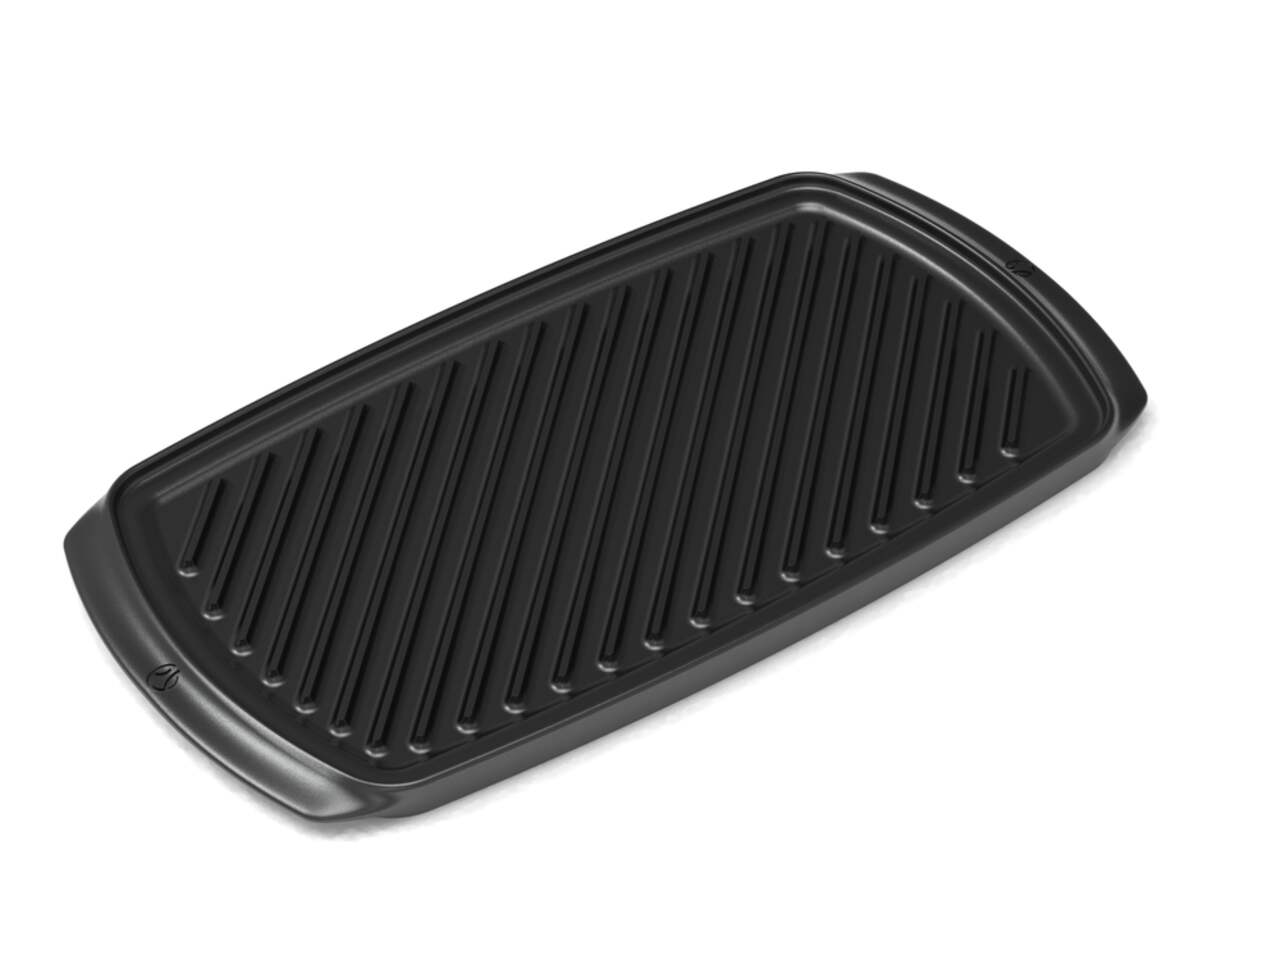 https://media-www.canadiantire.ca/product/living/kitchen/cookware/1429871/paderno-signature-cast-iron-reversible-grill-and-griddle-db6359f6-9a58-47a5-aa81-e9ef07117658.png?imdensity=1&imwidth=1244&impolicy=mZoom